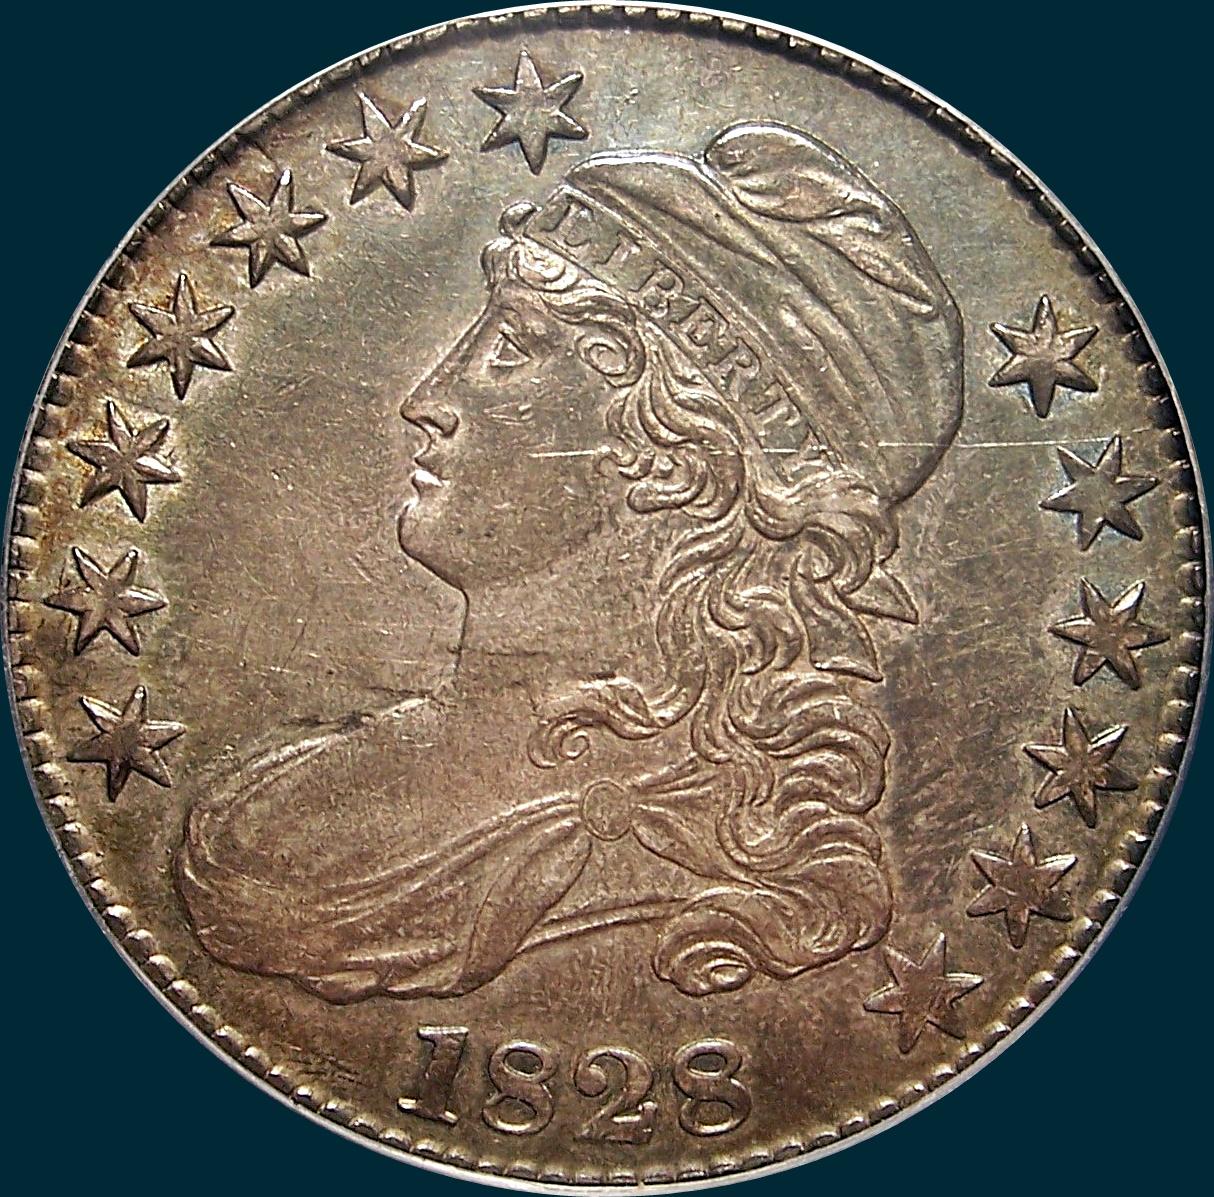 1828 O-122, small 8's large letters, capped bust half dollar